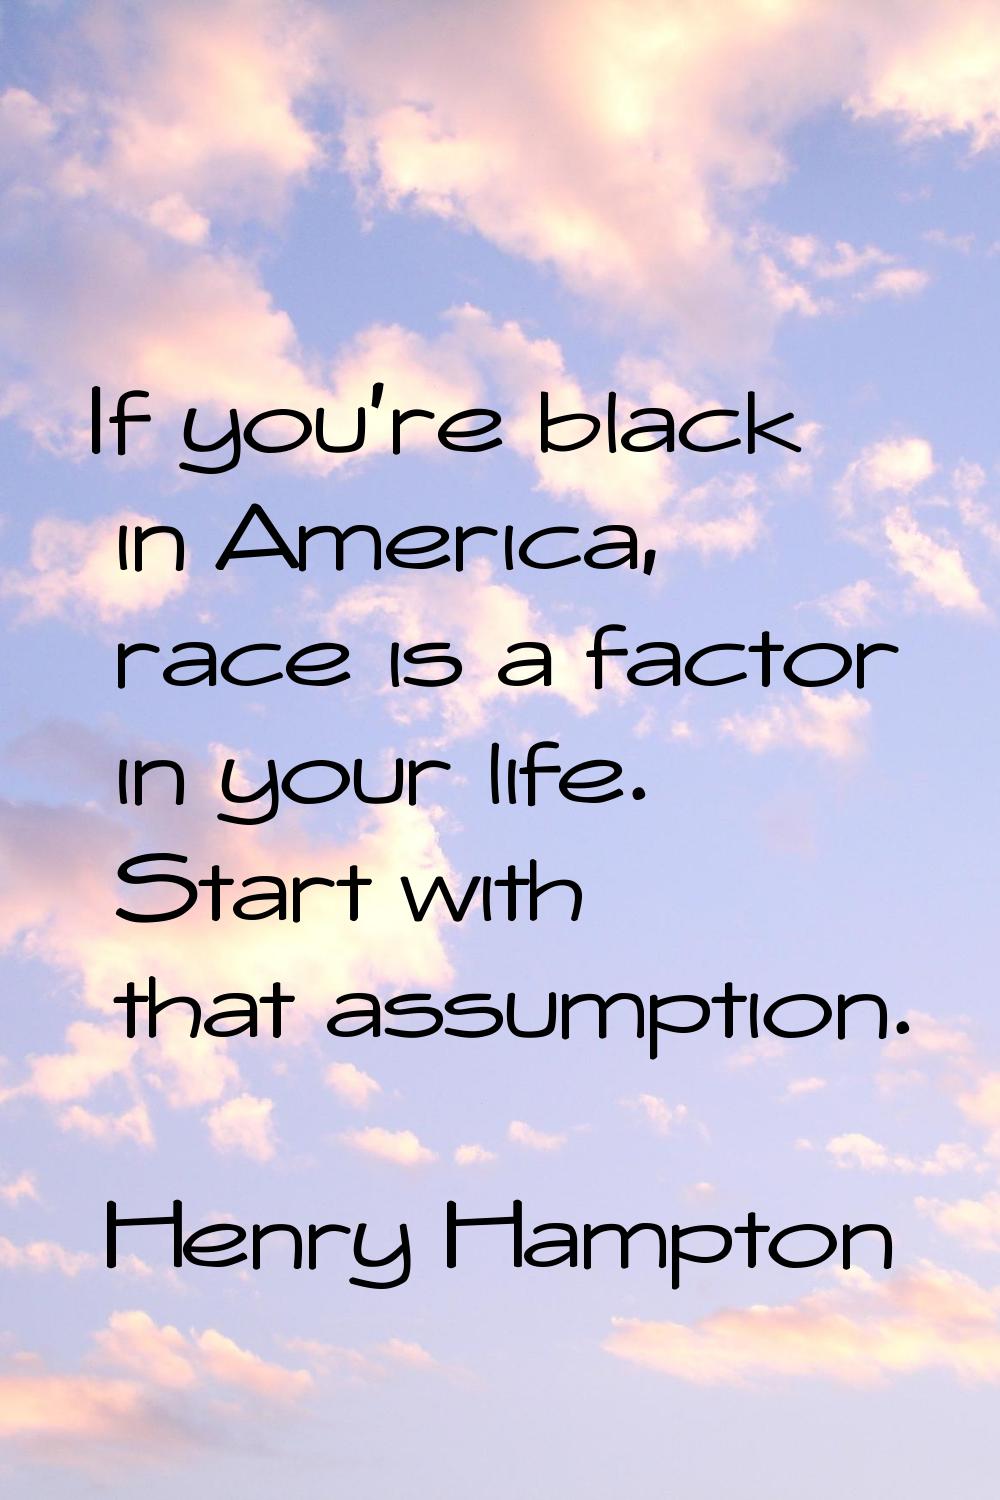 If you're black in America, race is a factor in your life. Start with that assumption.